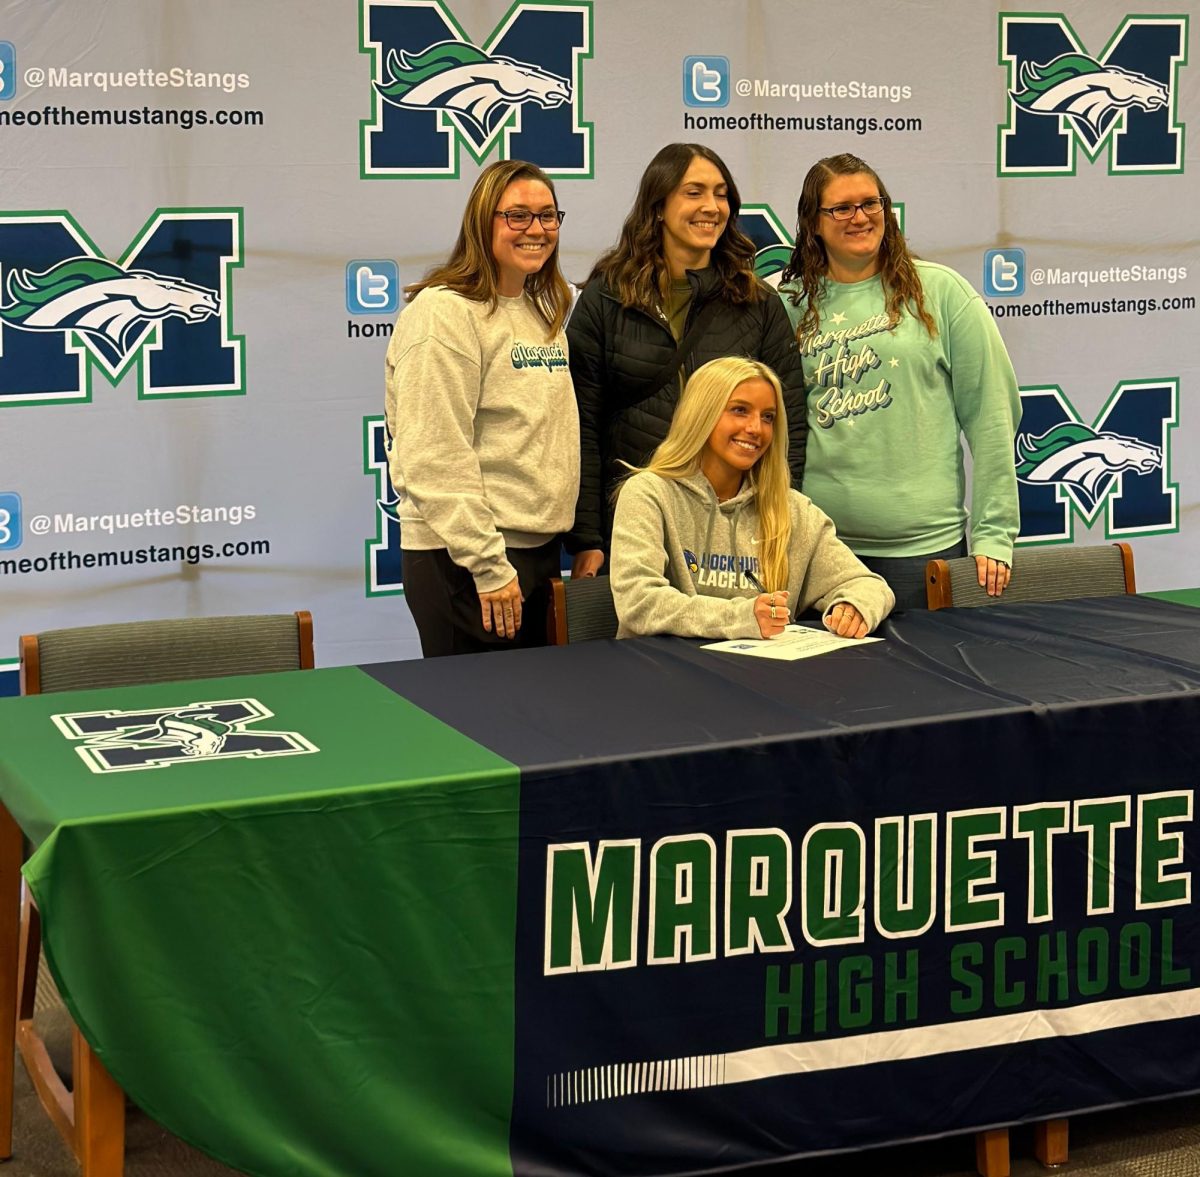 Katie Morgenthaler, senior, poses with MHS lacrosse coaches Marissa Albanello, Renee Abrolat and Katherine Schroeder during Winter Signing Day on Monday, Nov. 27.